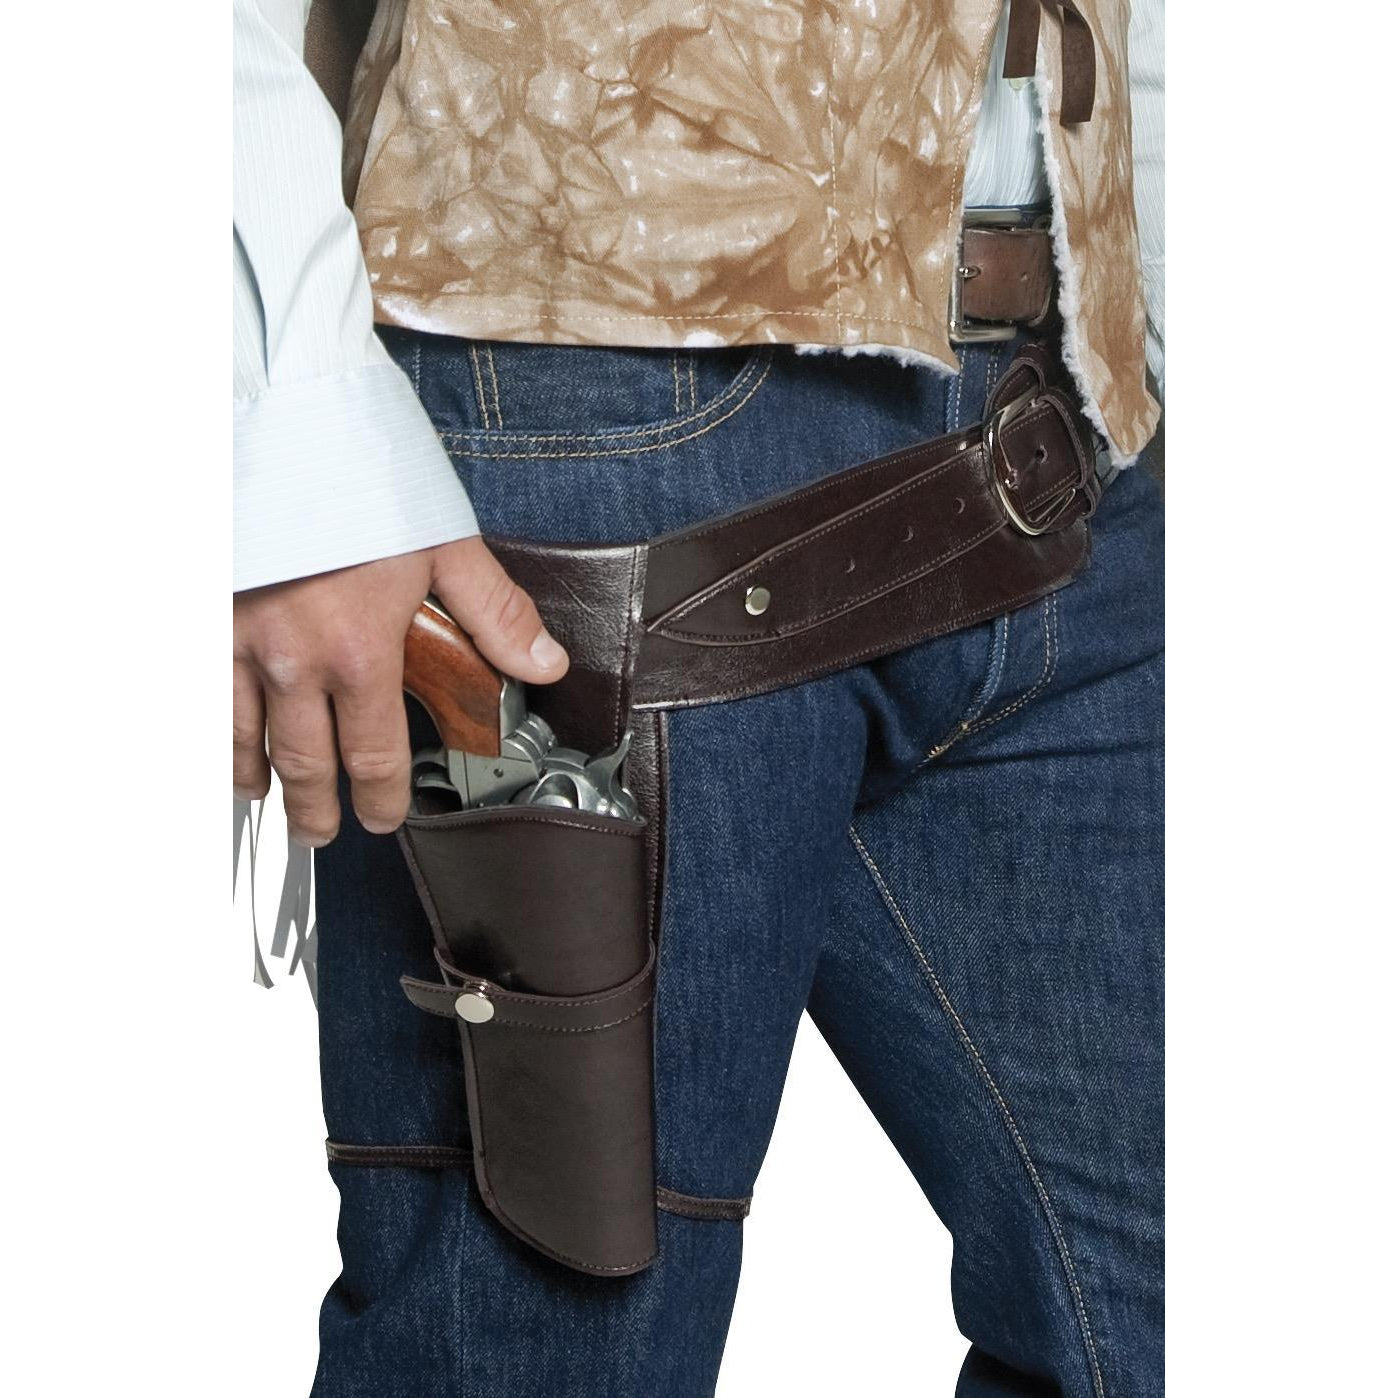 Western Authentic Gunman Belt and Holster